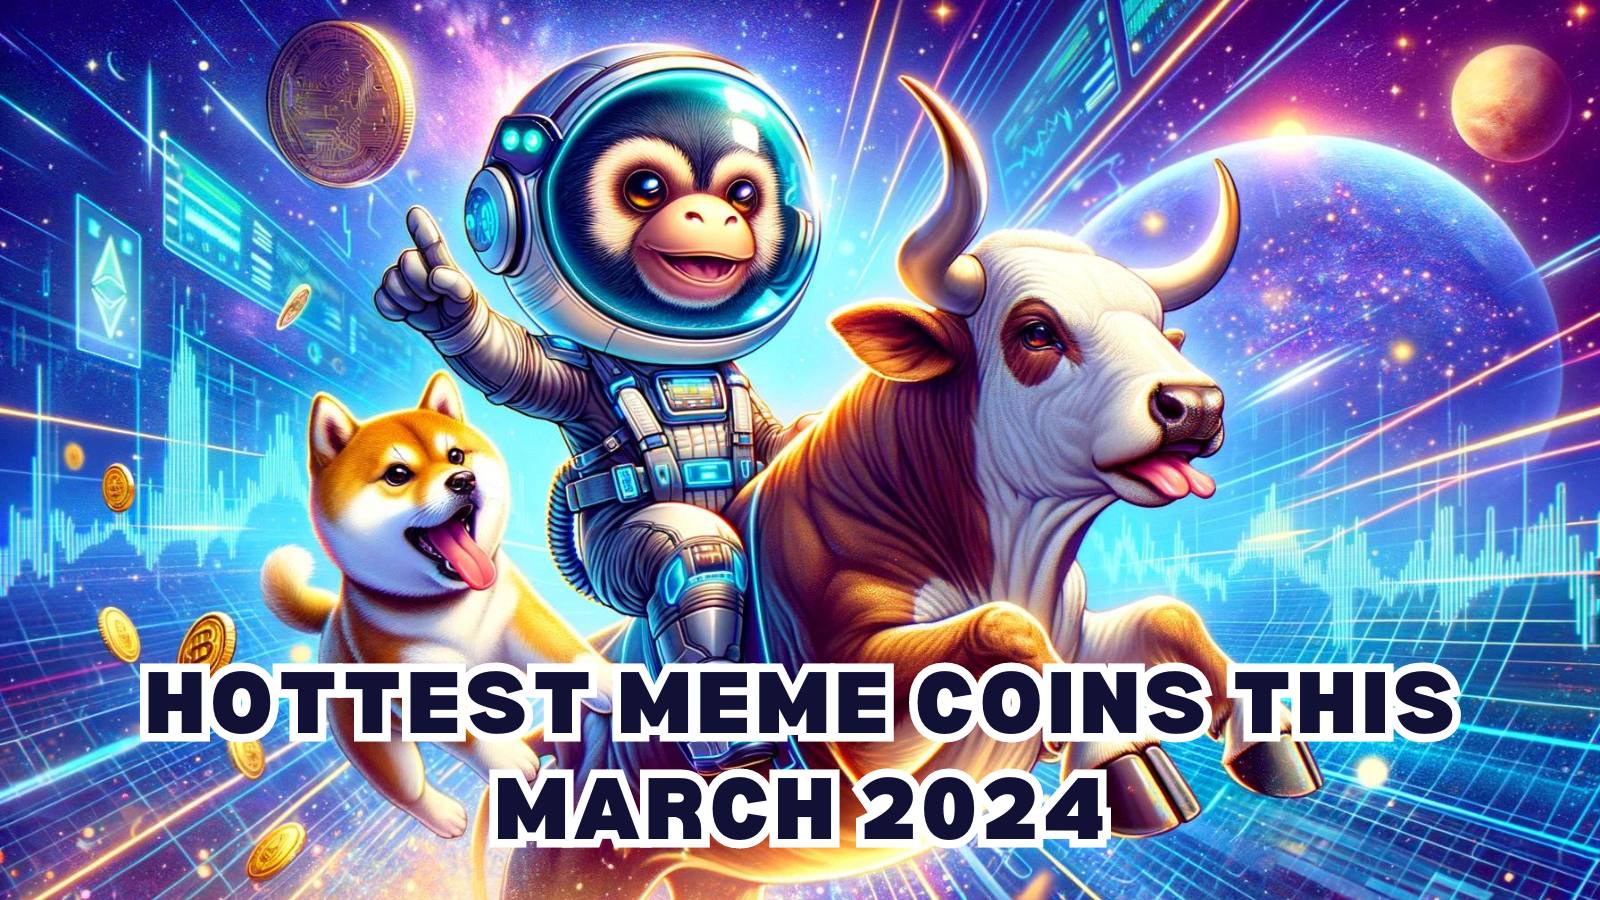 Are We Headed for Another Bull Run? Hottest Meme Coins This March 2024 | ApeMax, Bonk, Pepe, Wen, Shiba Inu, Floki